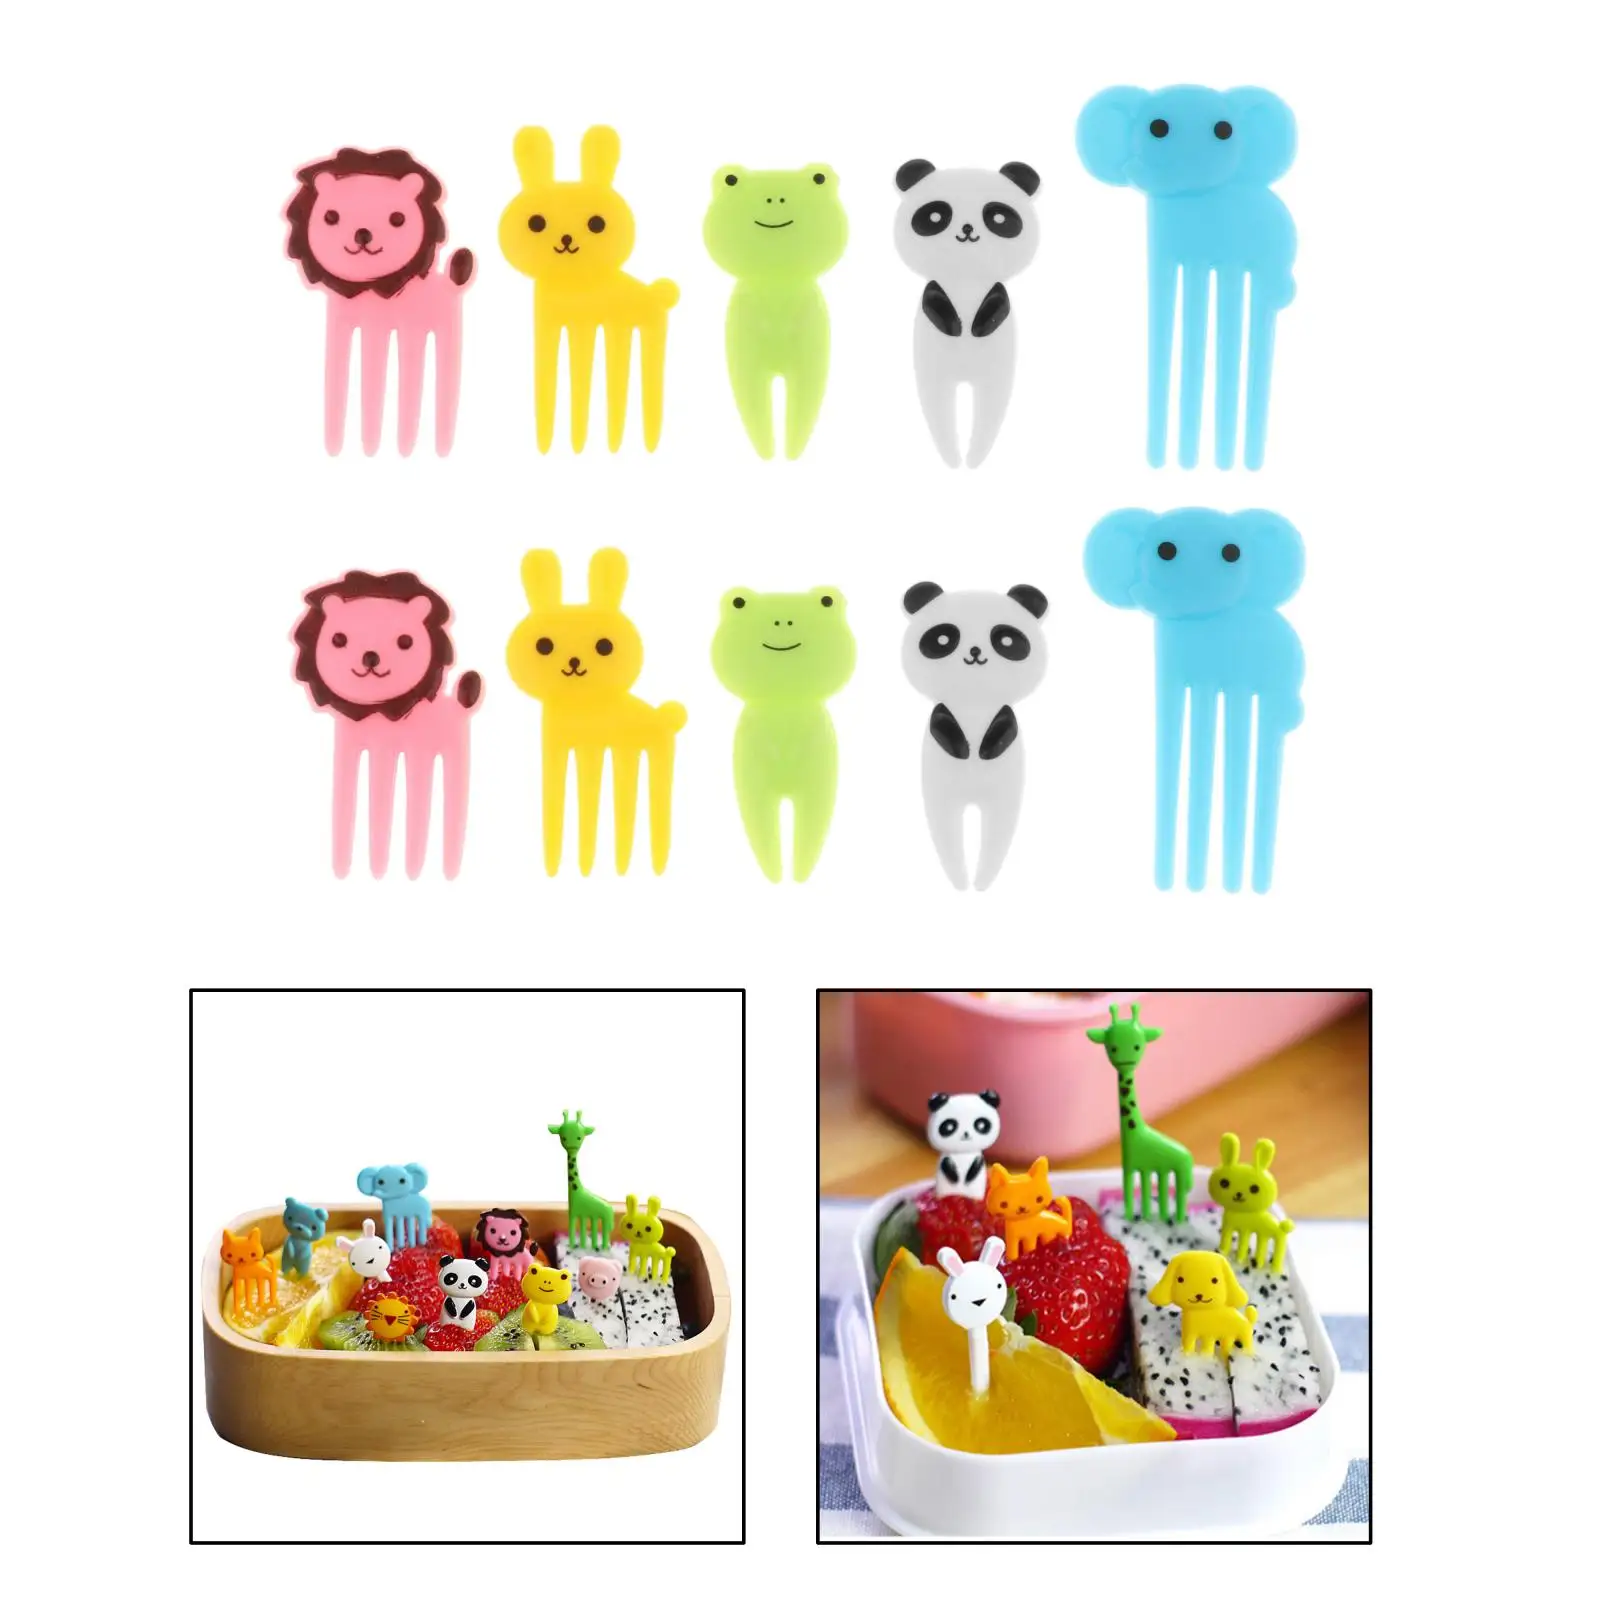 Details about   New 10x Bento Kawaii Animal Food Fruit Picks Forks Lunch Box Accessory Hot L6C0 